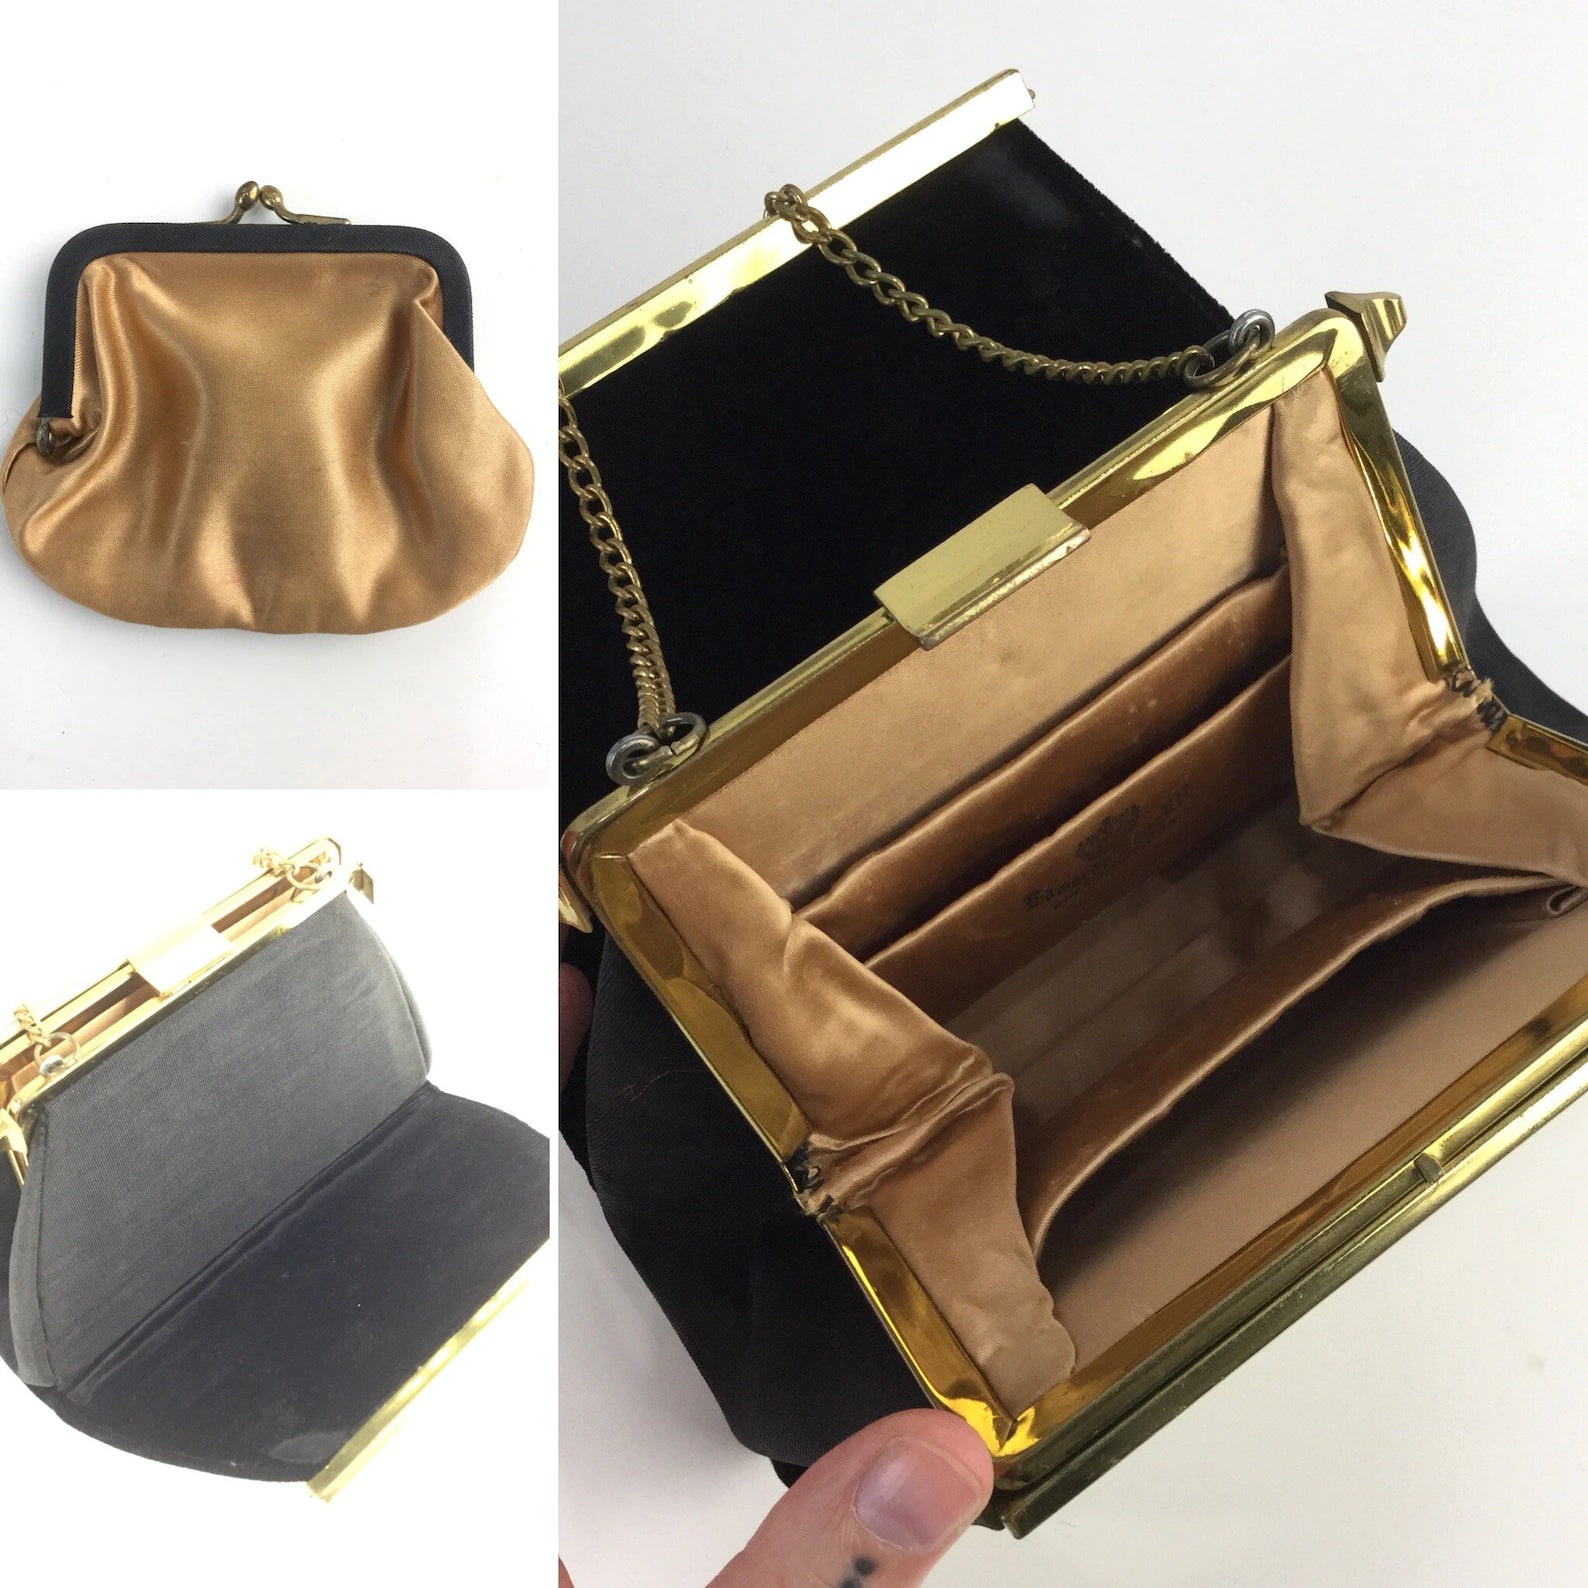 Vintage 1950s Gold Clasp Edwards Bags Ltd. Convertible Gold & Black Evening Purse, Mid-Century 2 in 1 Bag